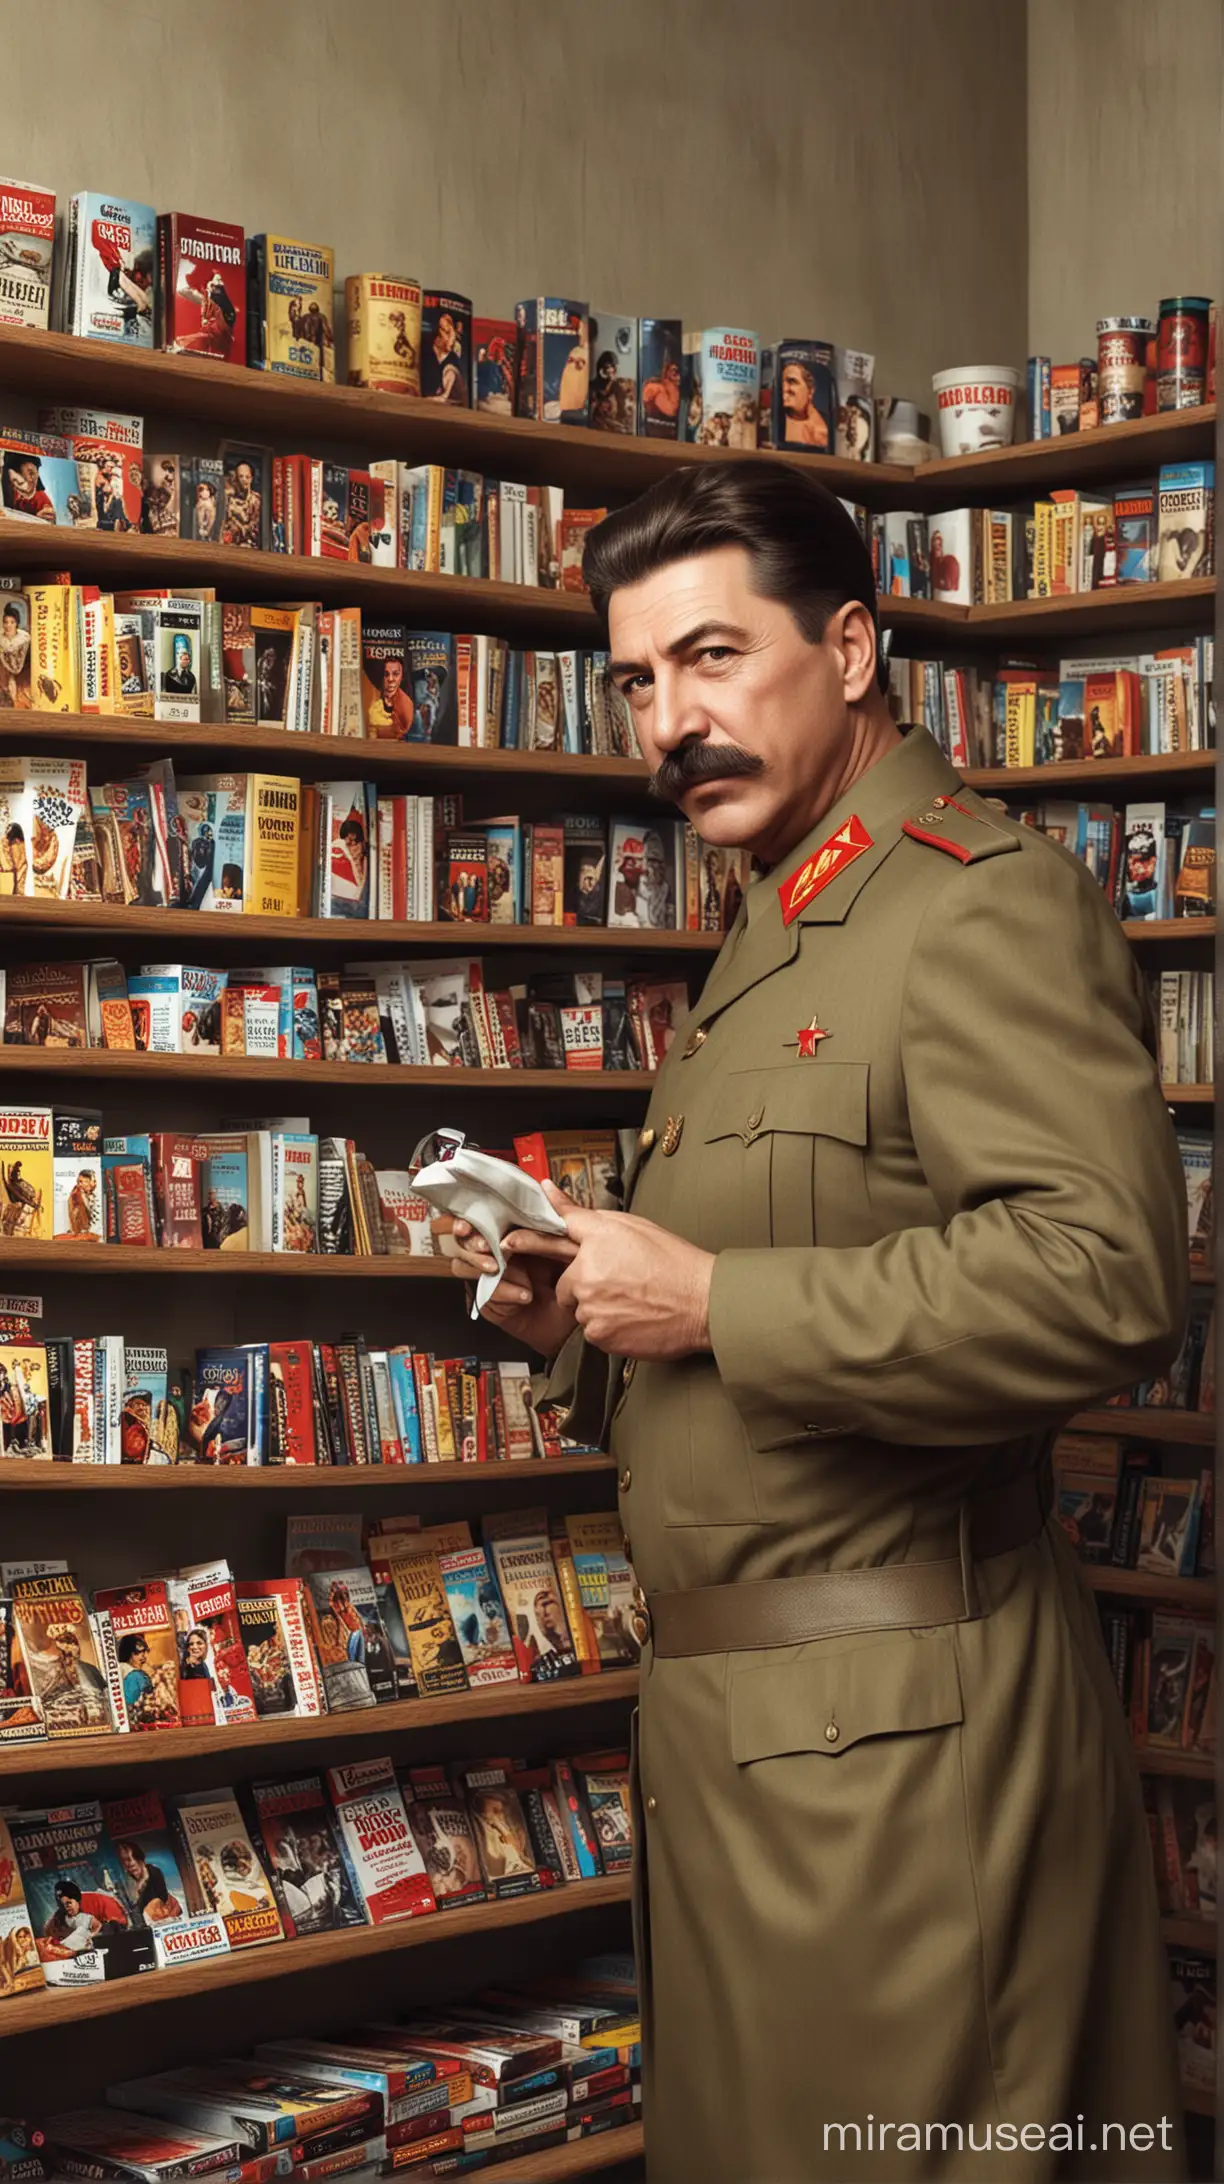 Create an image of Joseph Stalin cleaning collection of movies on wall shelves. Hyper realistic